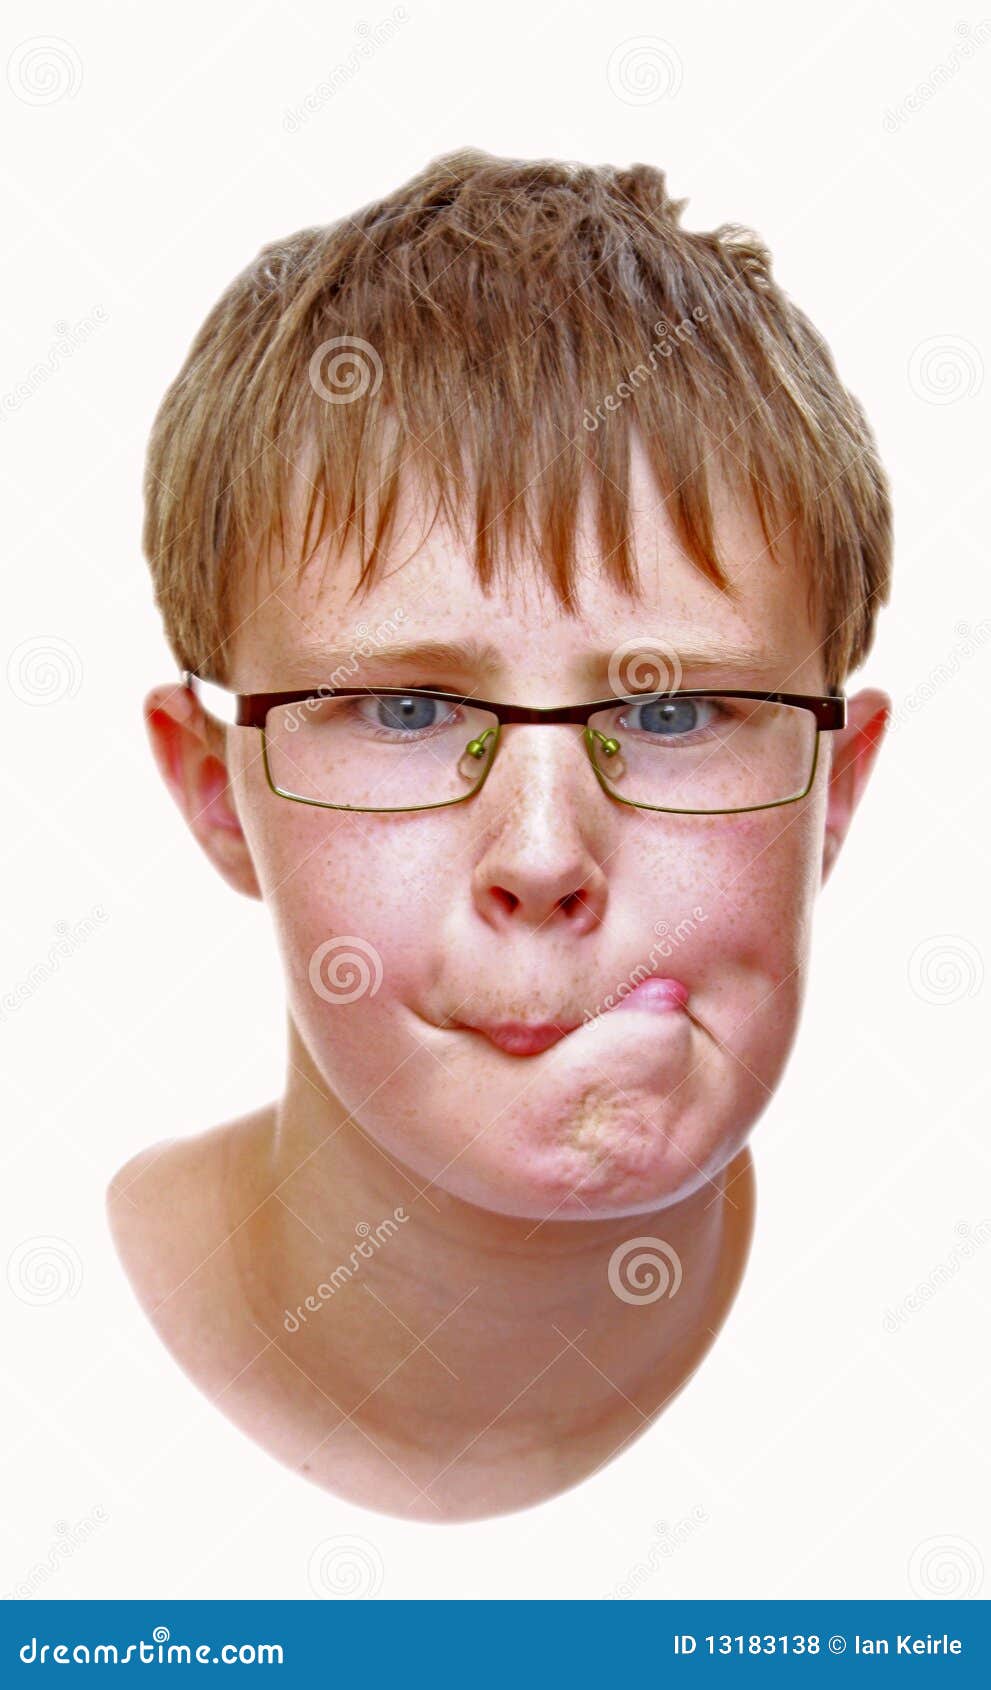 Boy making a funny face stock photo. Image of funny, mouth - 13183138